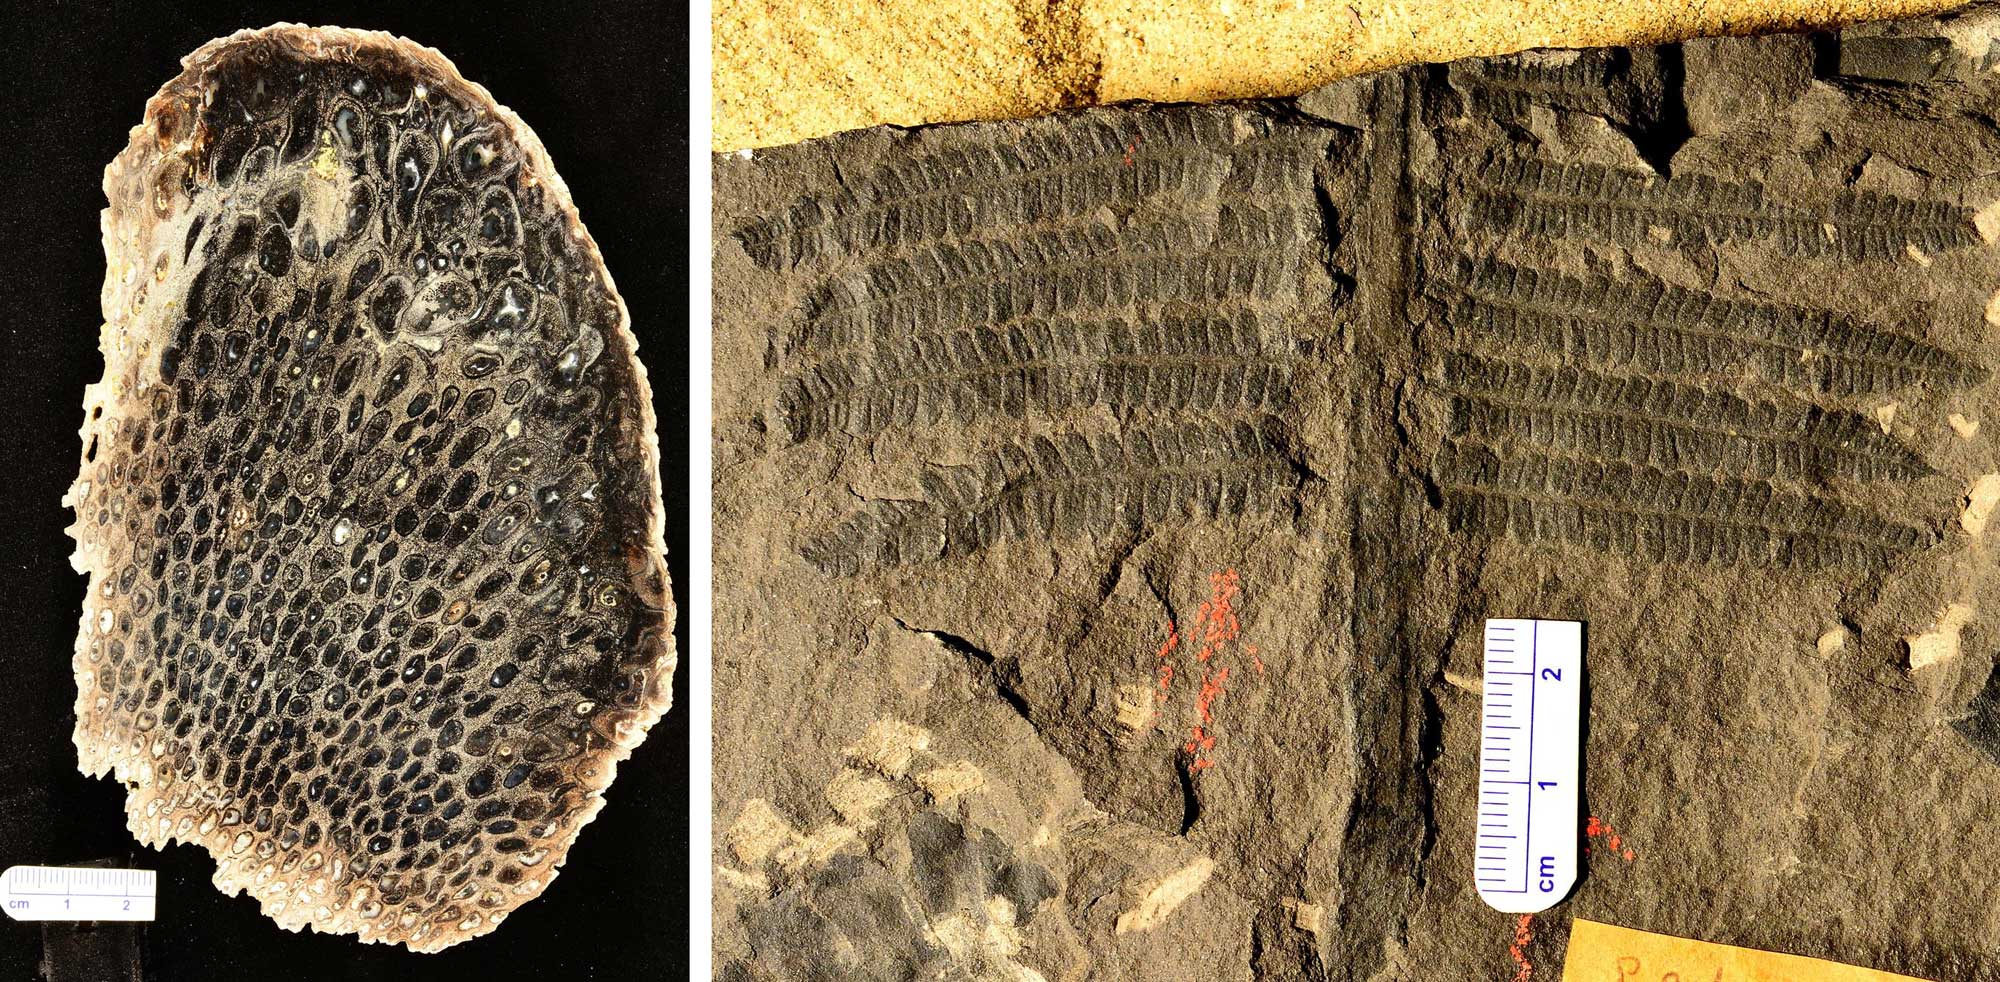 2-panel figure of marattioid ferns from Ohio, both specimens probably Carboniferous. Panel 1: Cross section of a root mantle in a permineralized specimen. This photo shows a series of oval structures surrounded by a gray matrix. Panel 2: Photo of a Pecopteris leaf. This photo shows the base of a compound leaf with a central axis and lateral pinnae. The pinnae are further subdivided into pinnules.